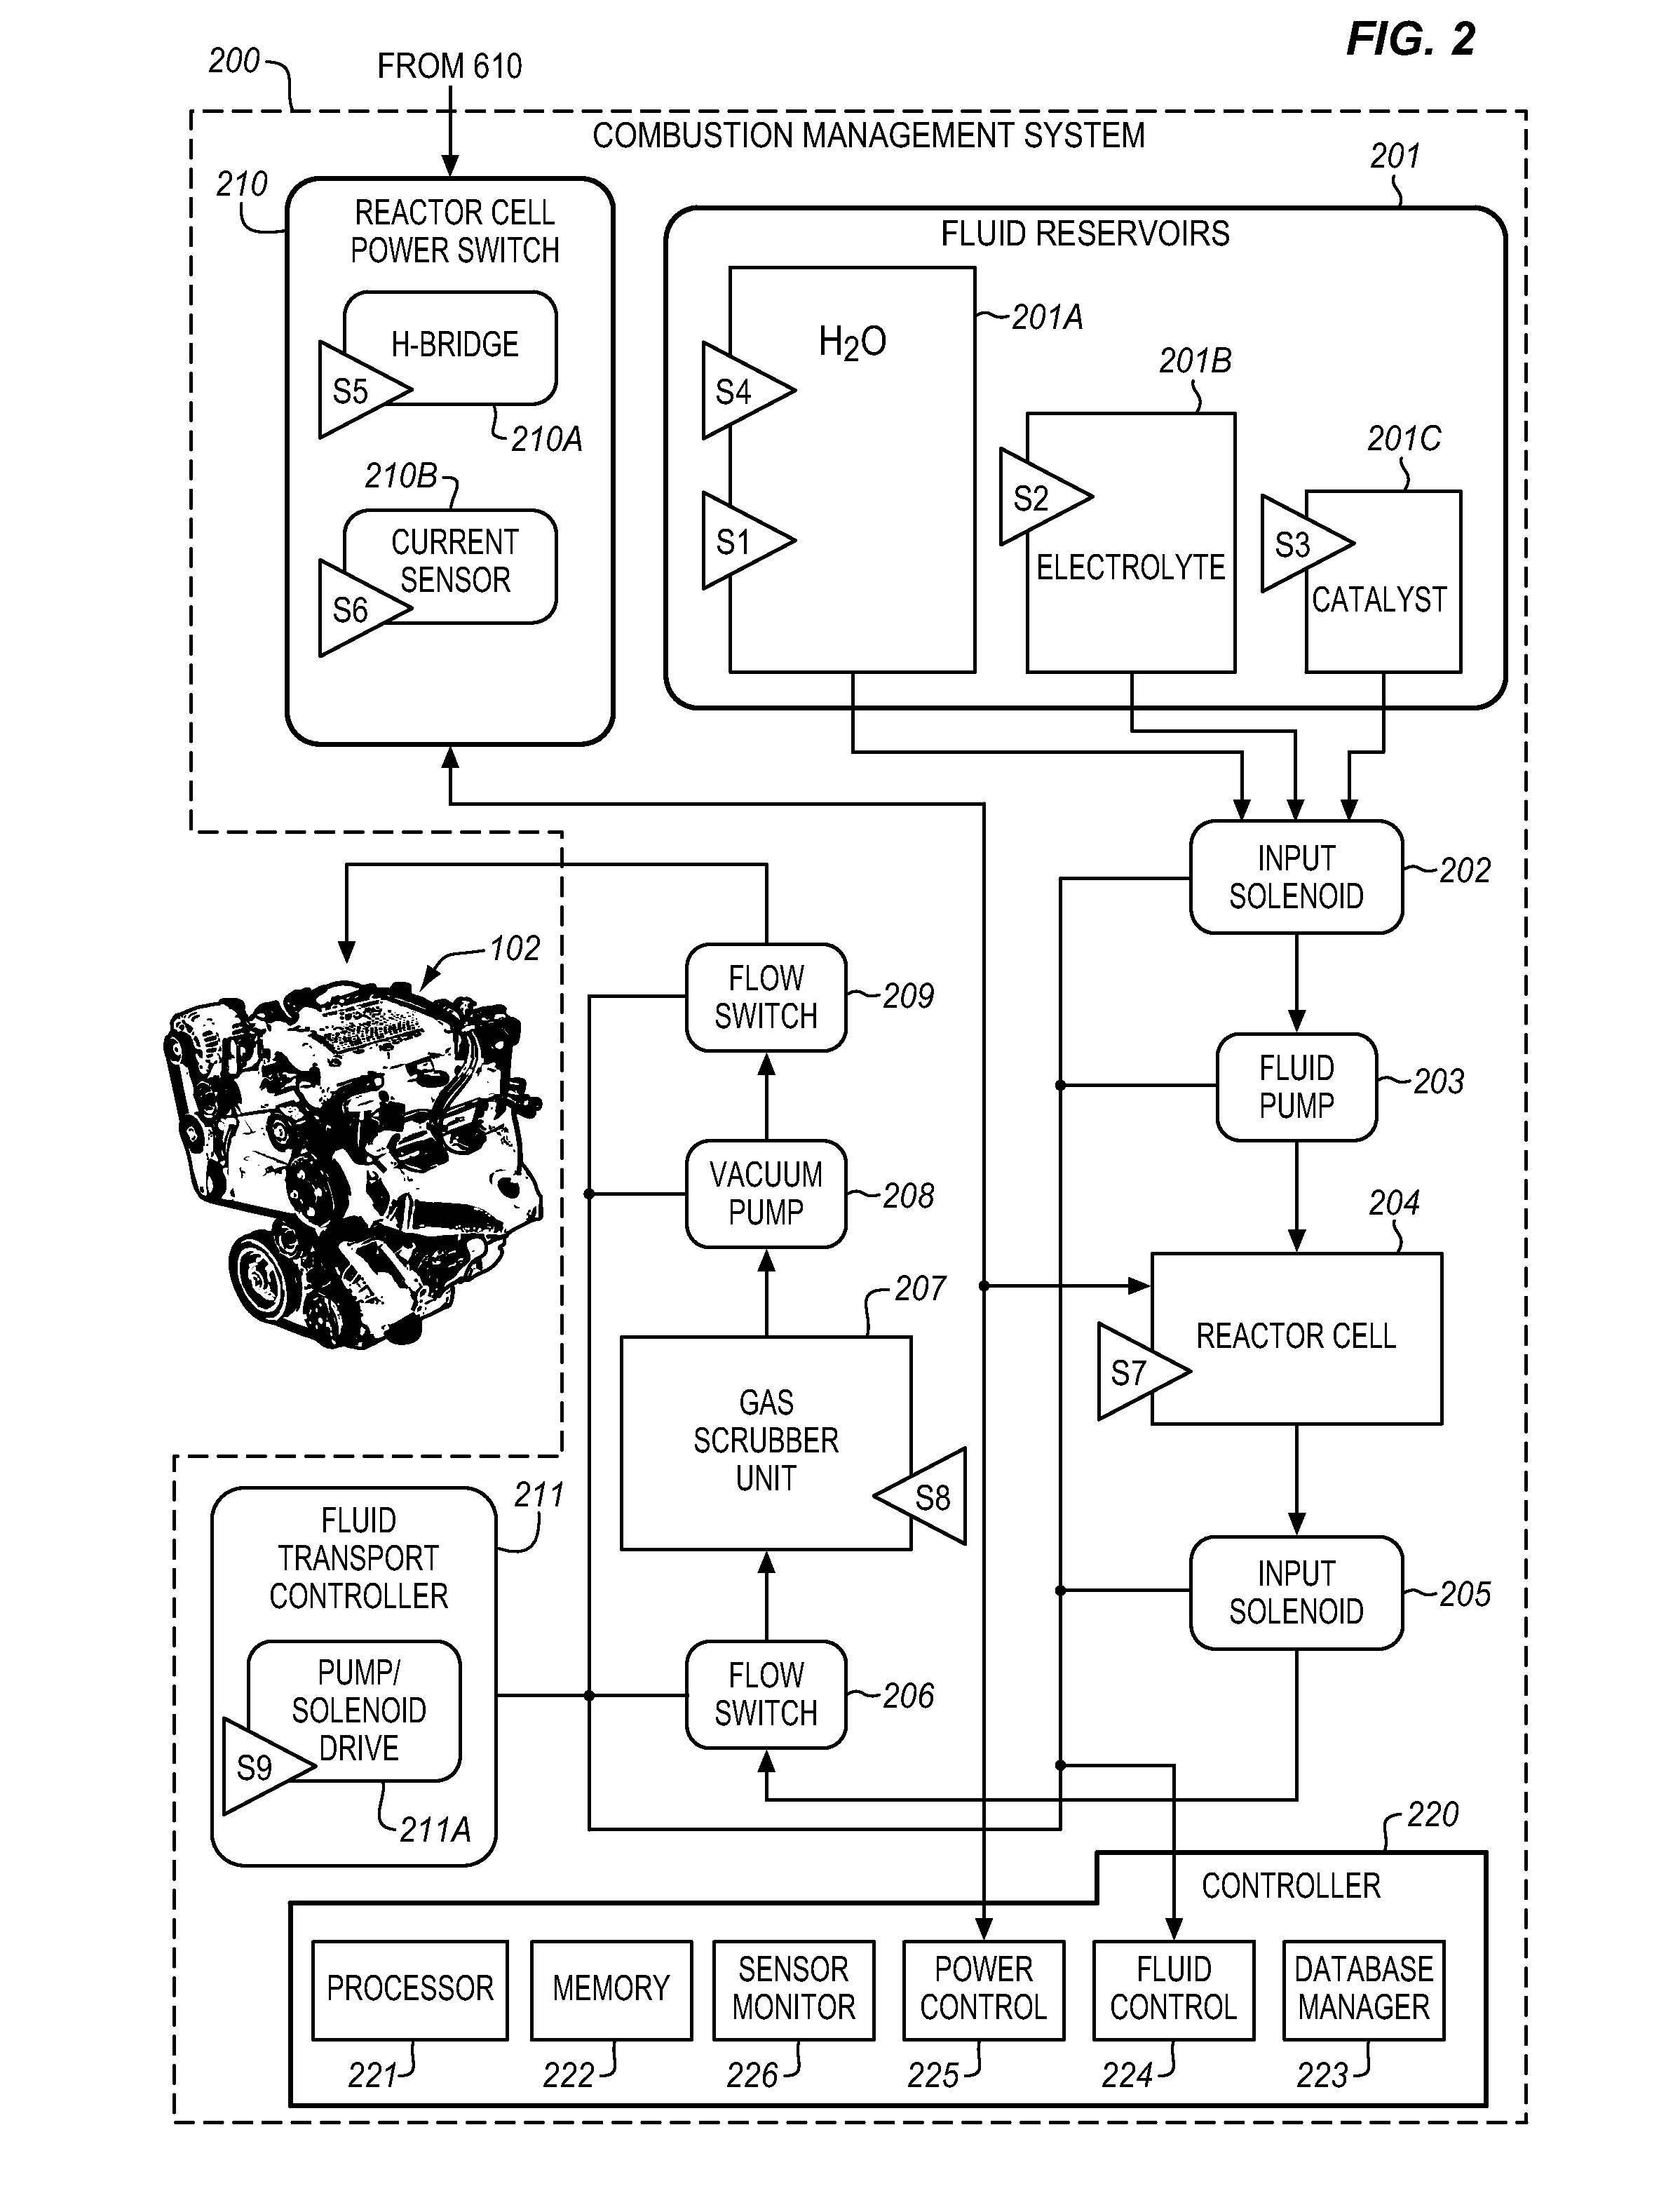 Product gas generator for producing a substantially stoichiometric mix of hydrogen and oxygen